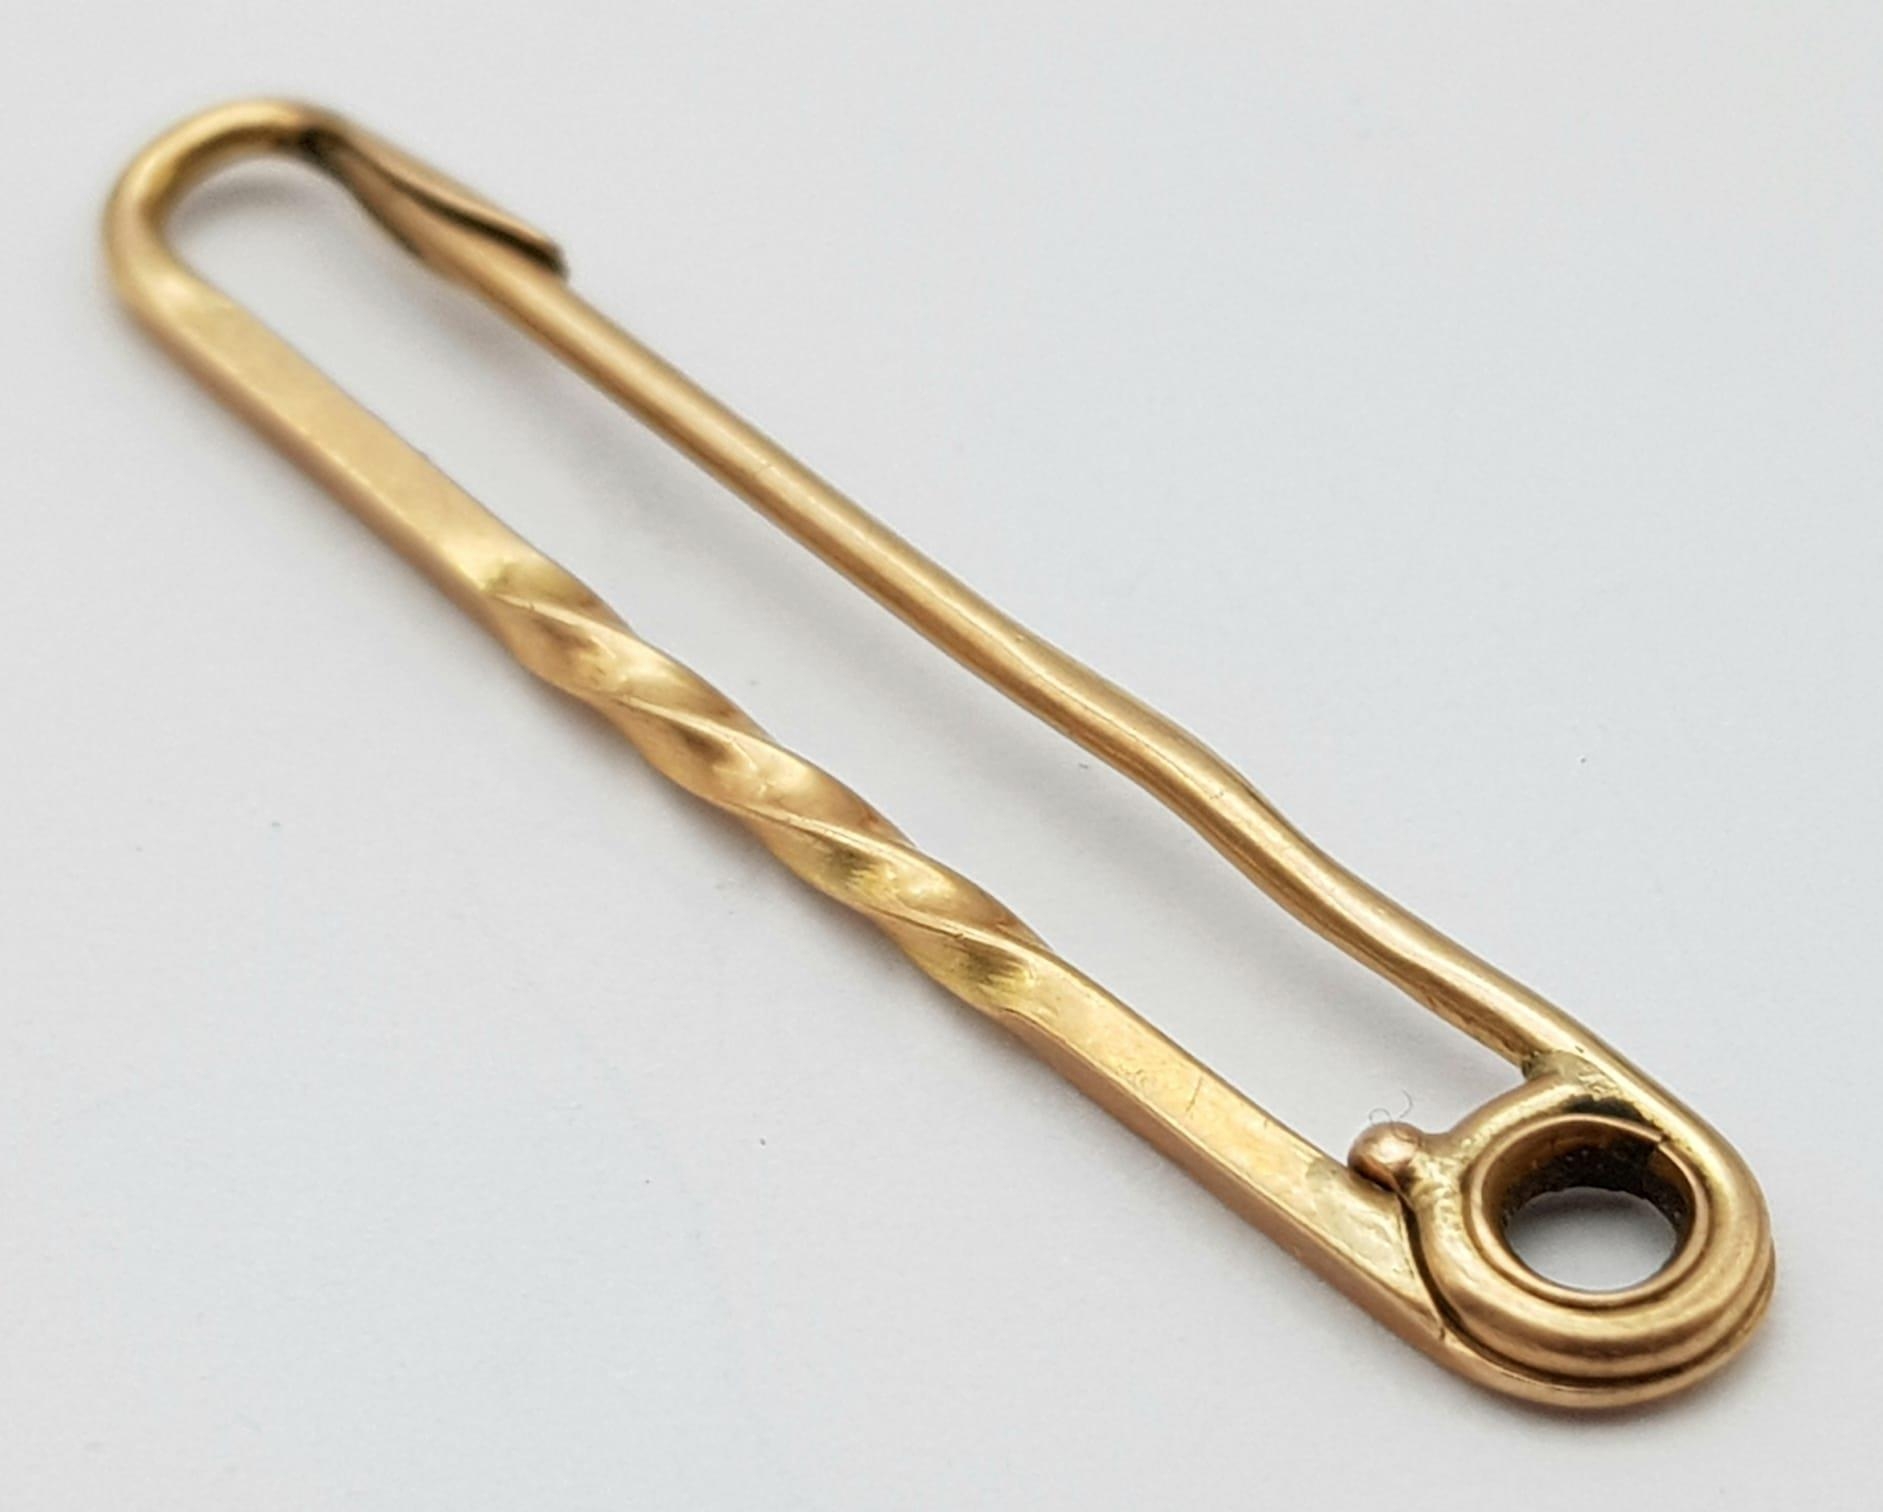 A vintage, 9 K rose gold safety pin brooch, length: 37 mm, weight: 1.4 g. - Image 2 of 4